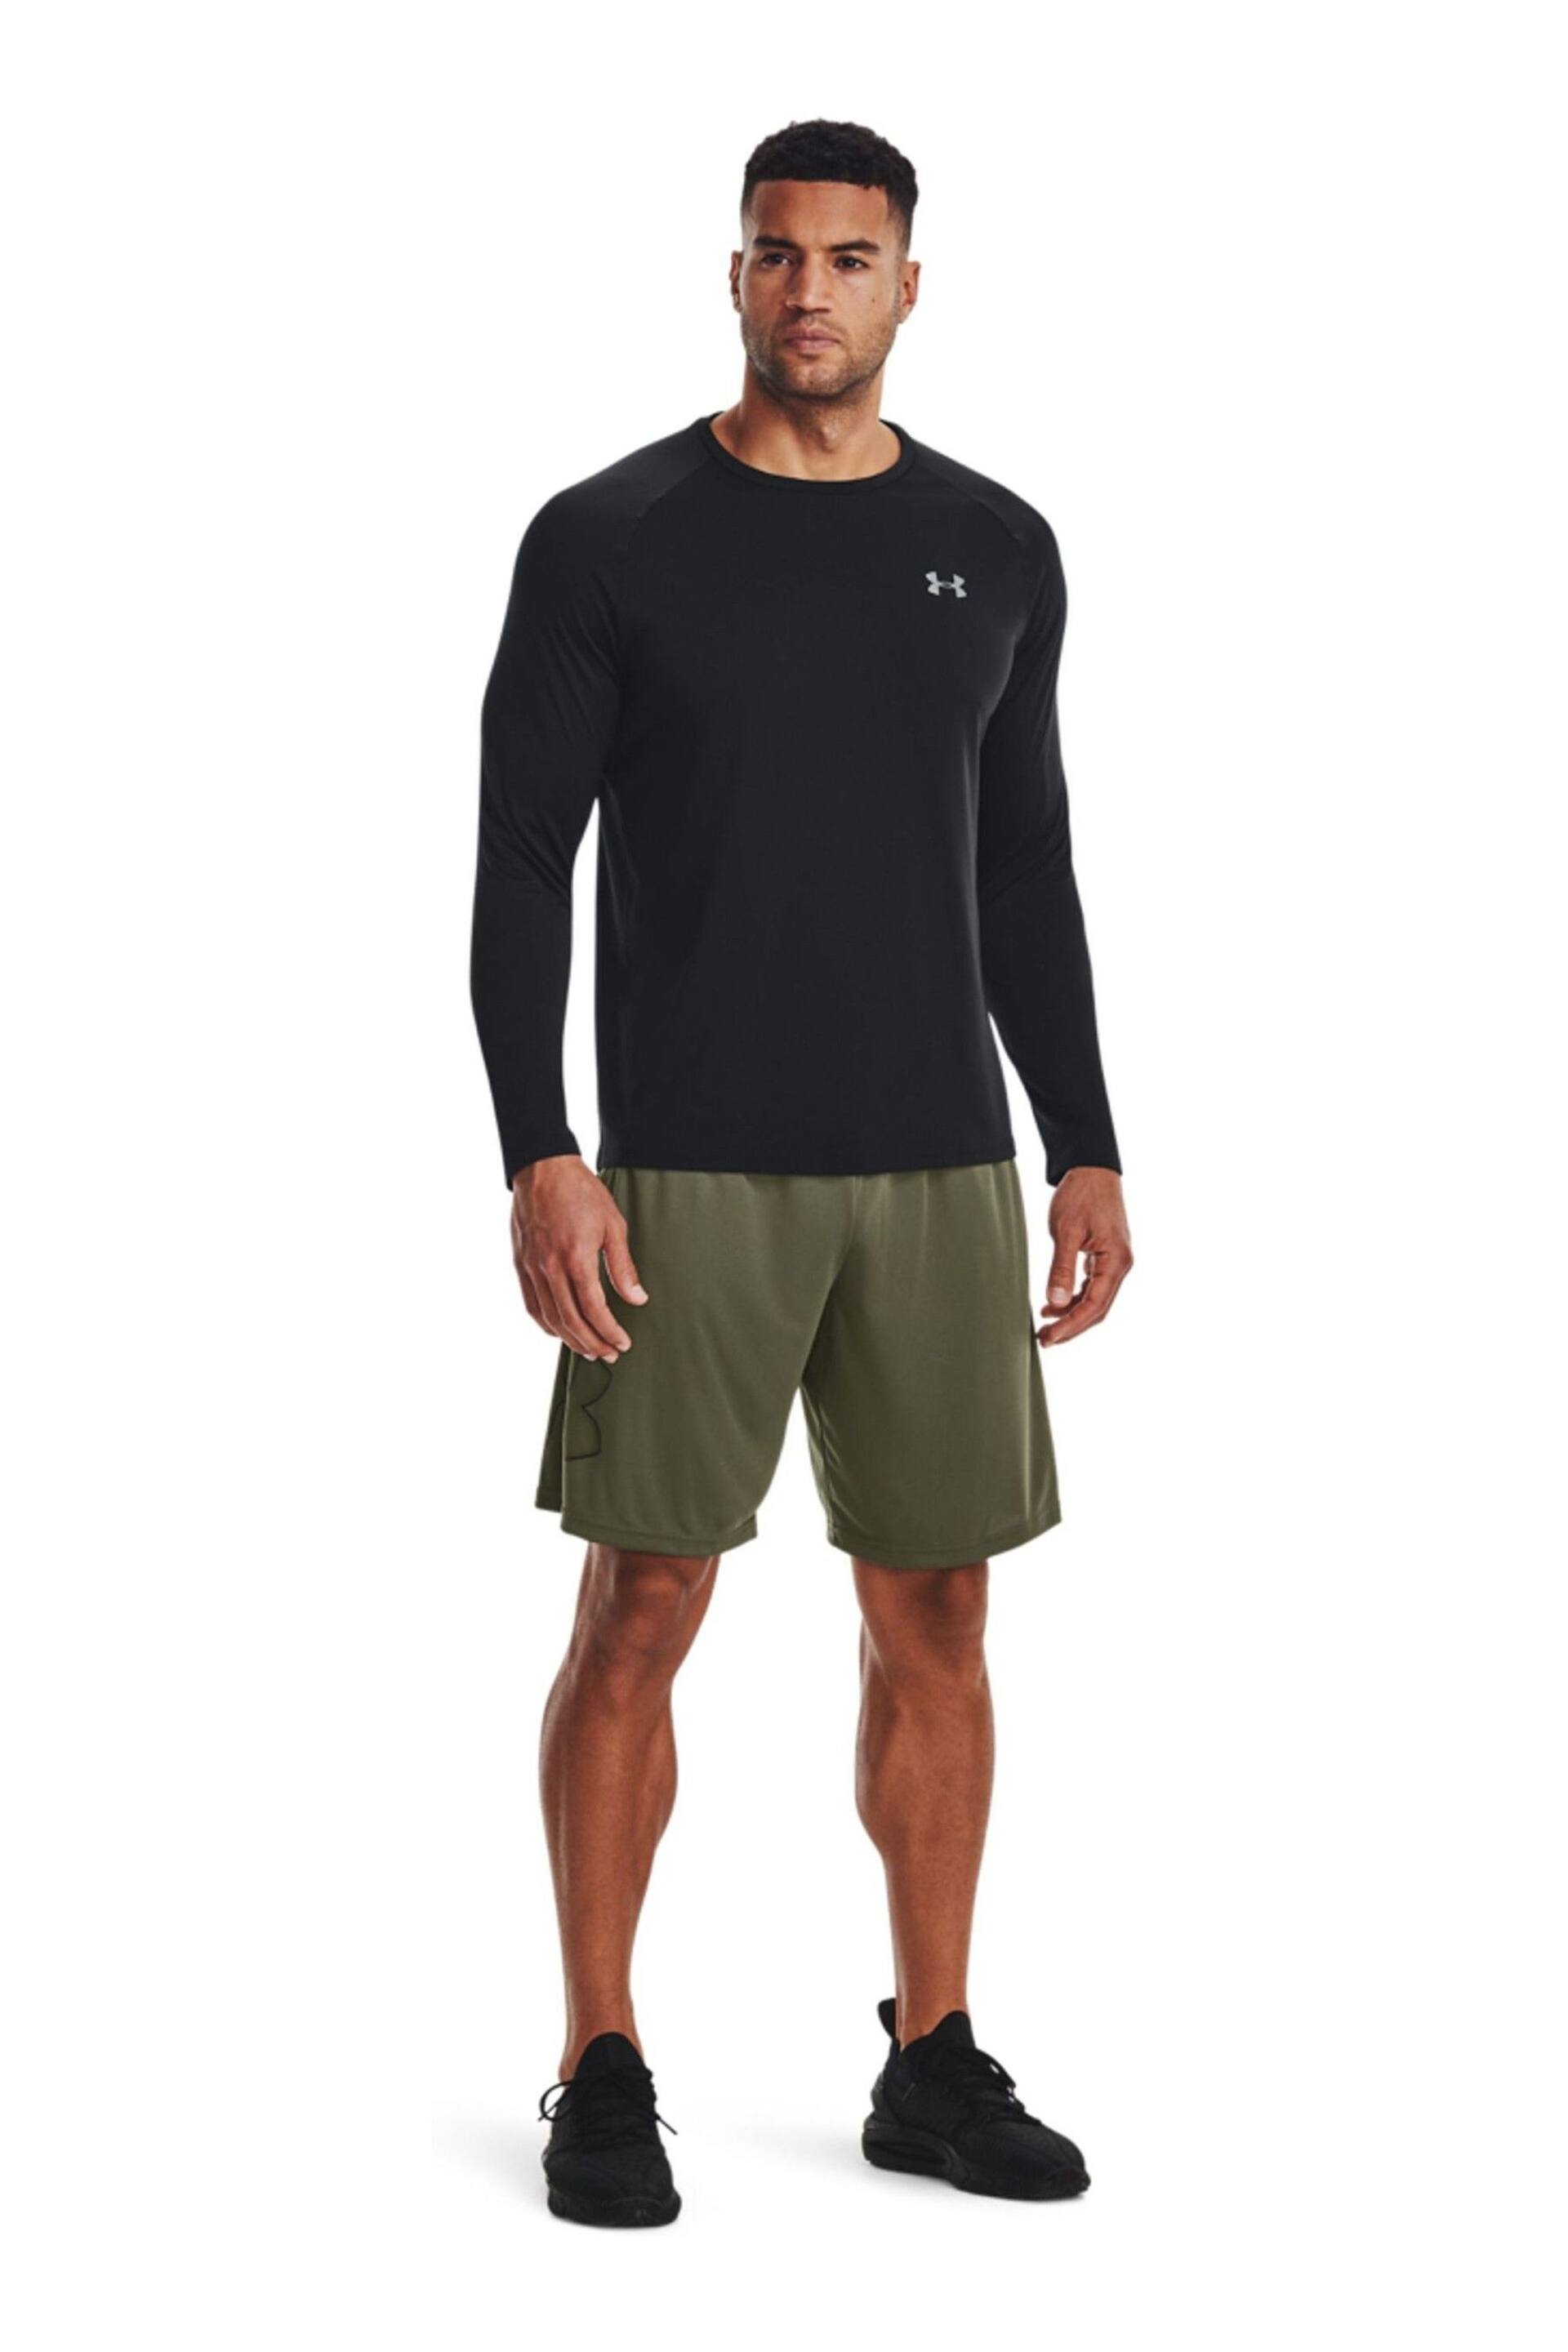 Under Armour Green Tech Graphic Shorts - Image 3 of 7